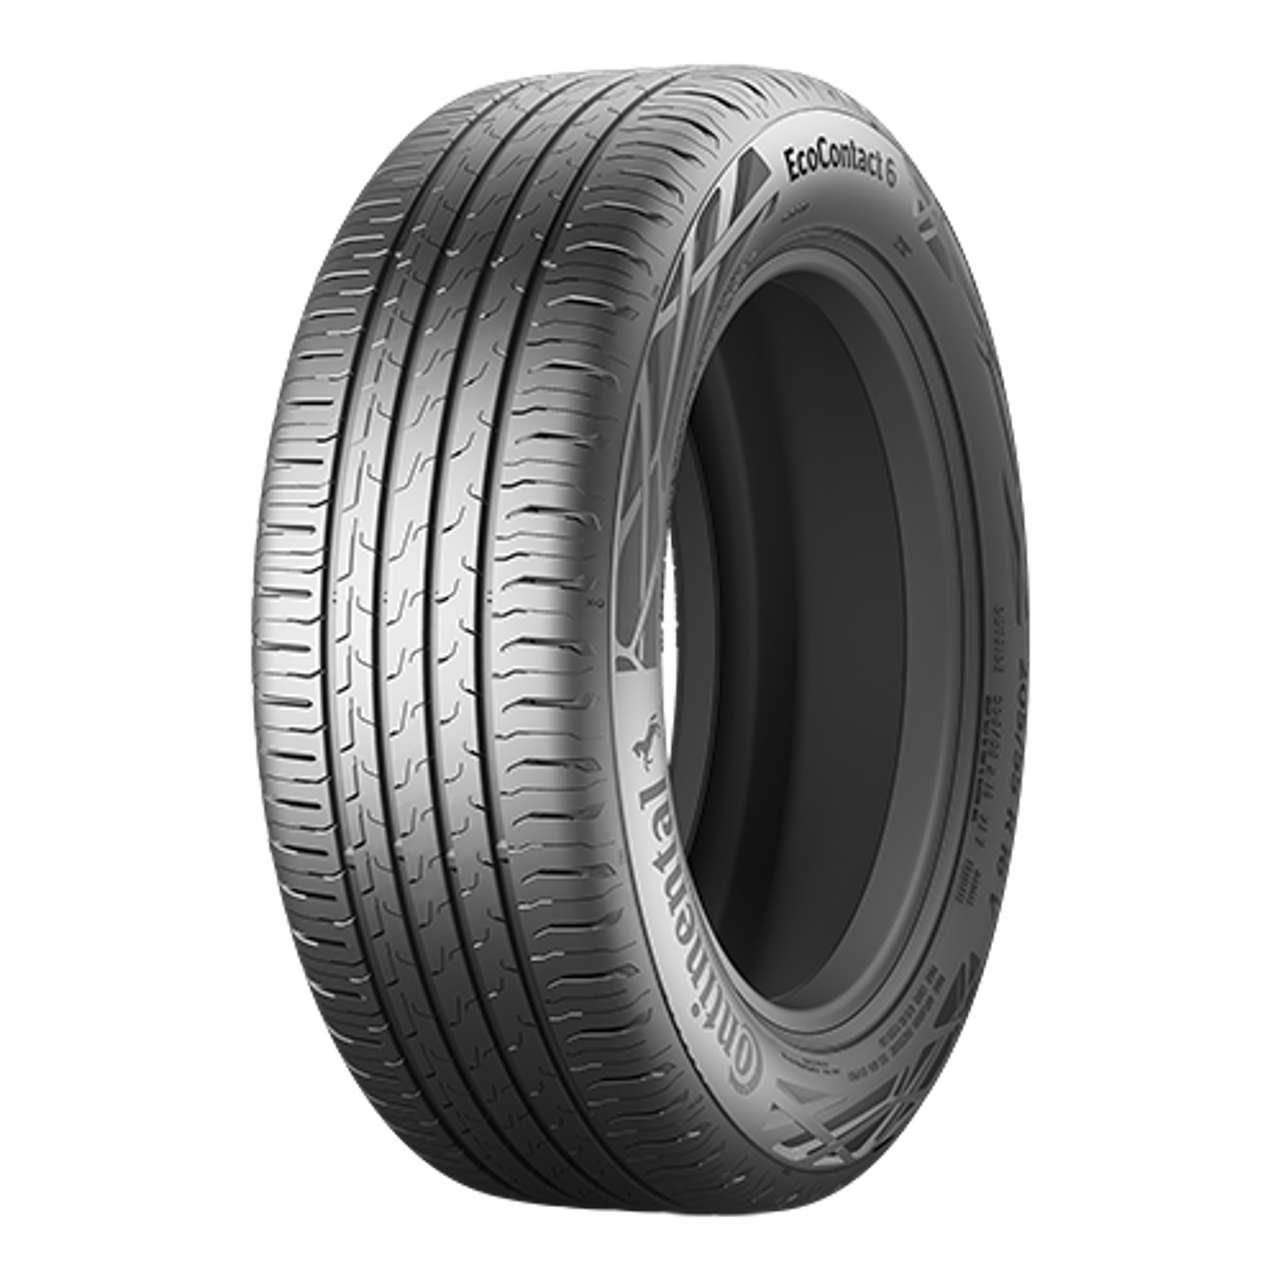 CONTINENTAL ECOCONTACT 6 (EVc) 225/45R17 94V von Continental